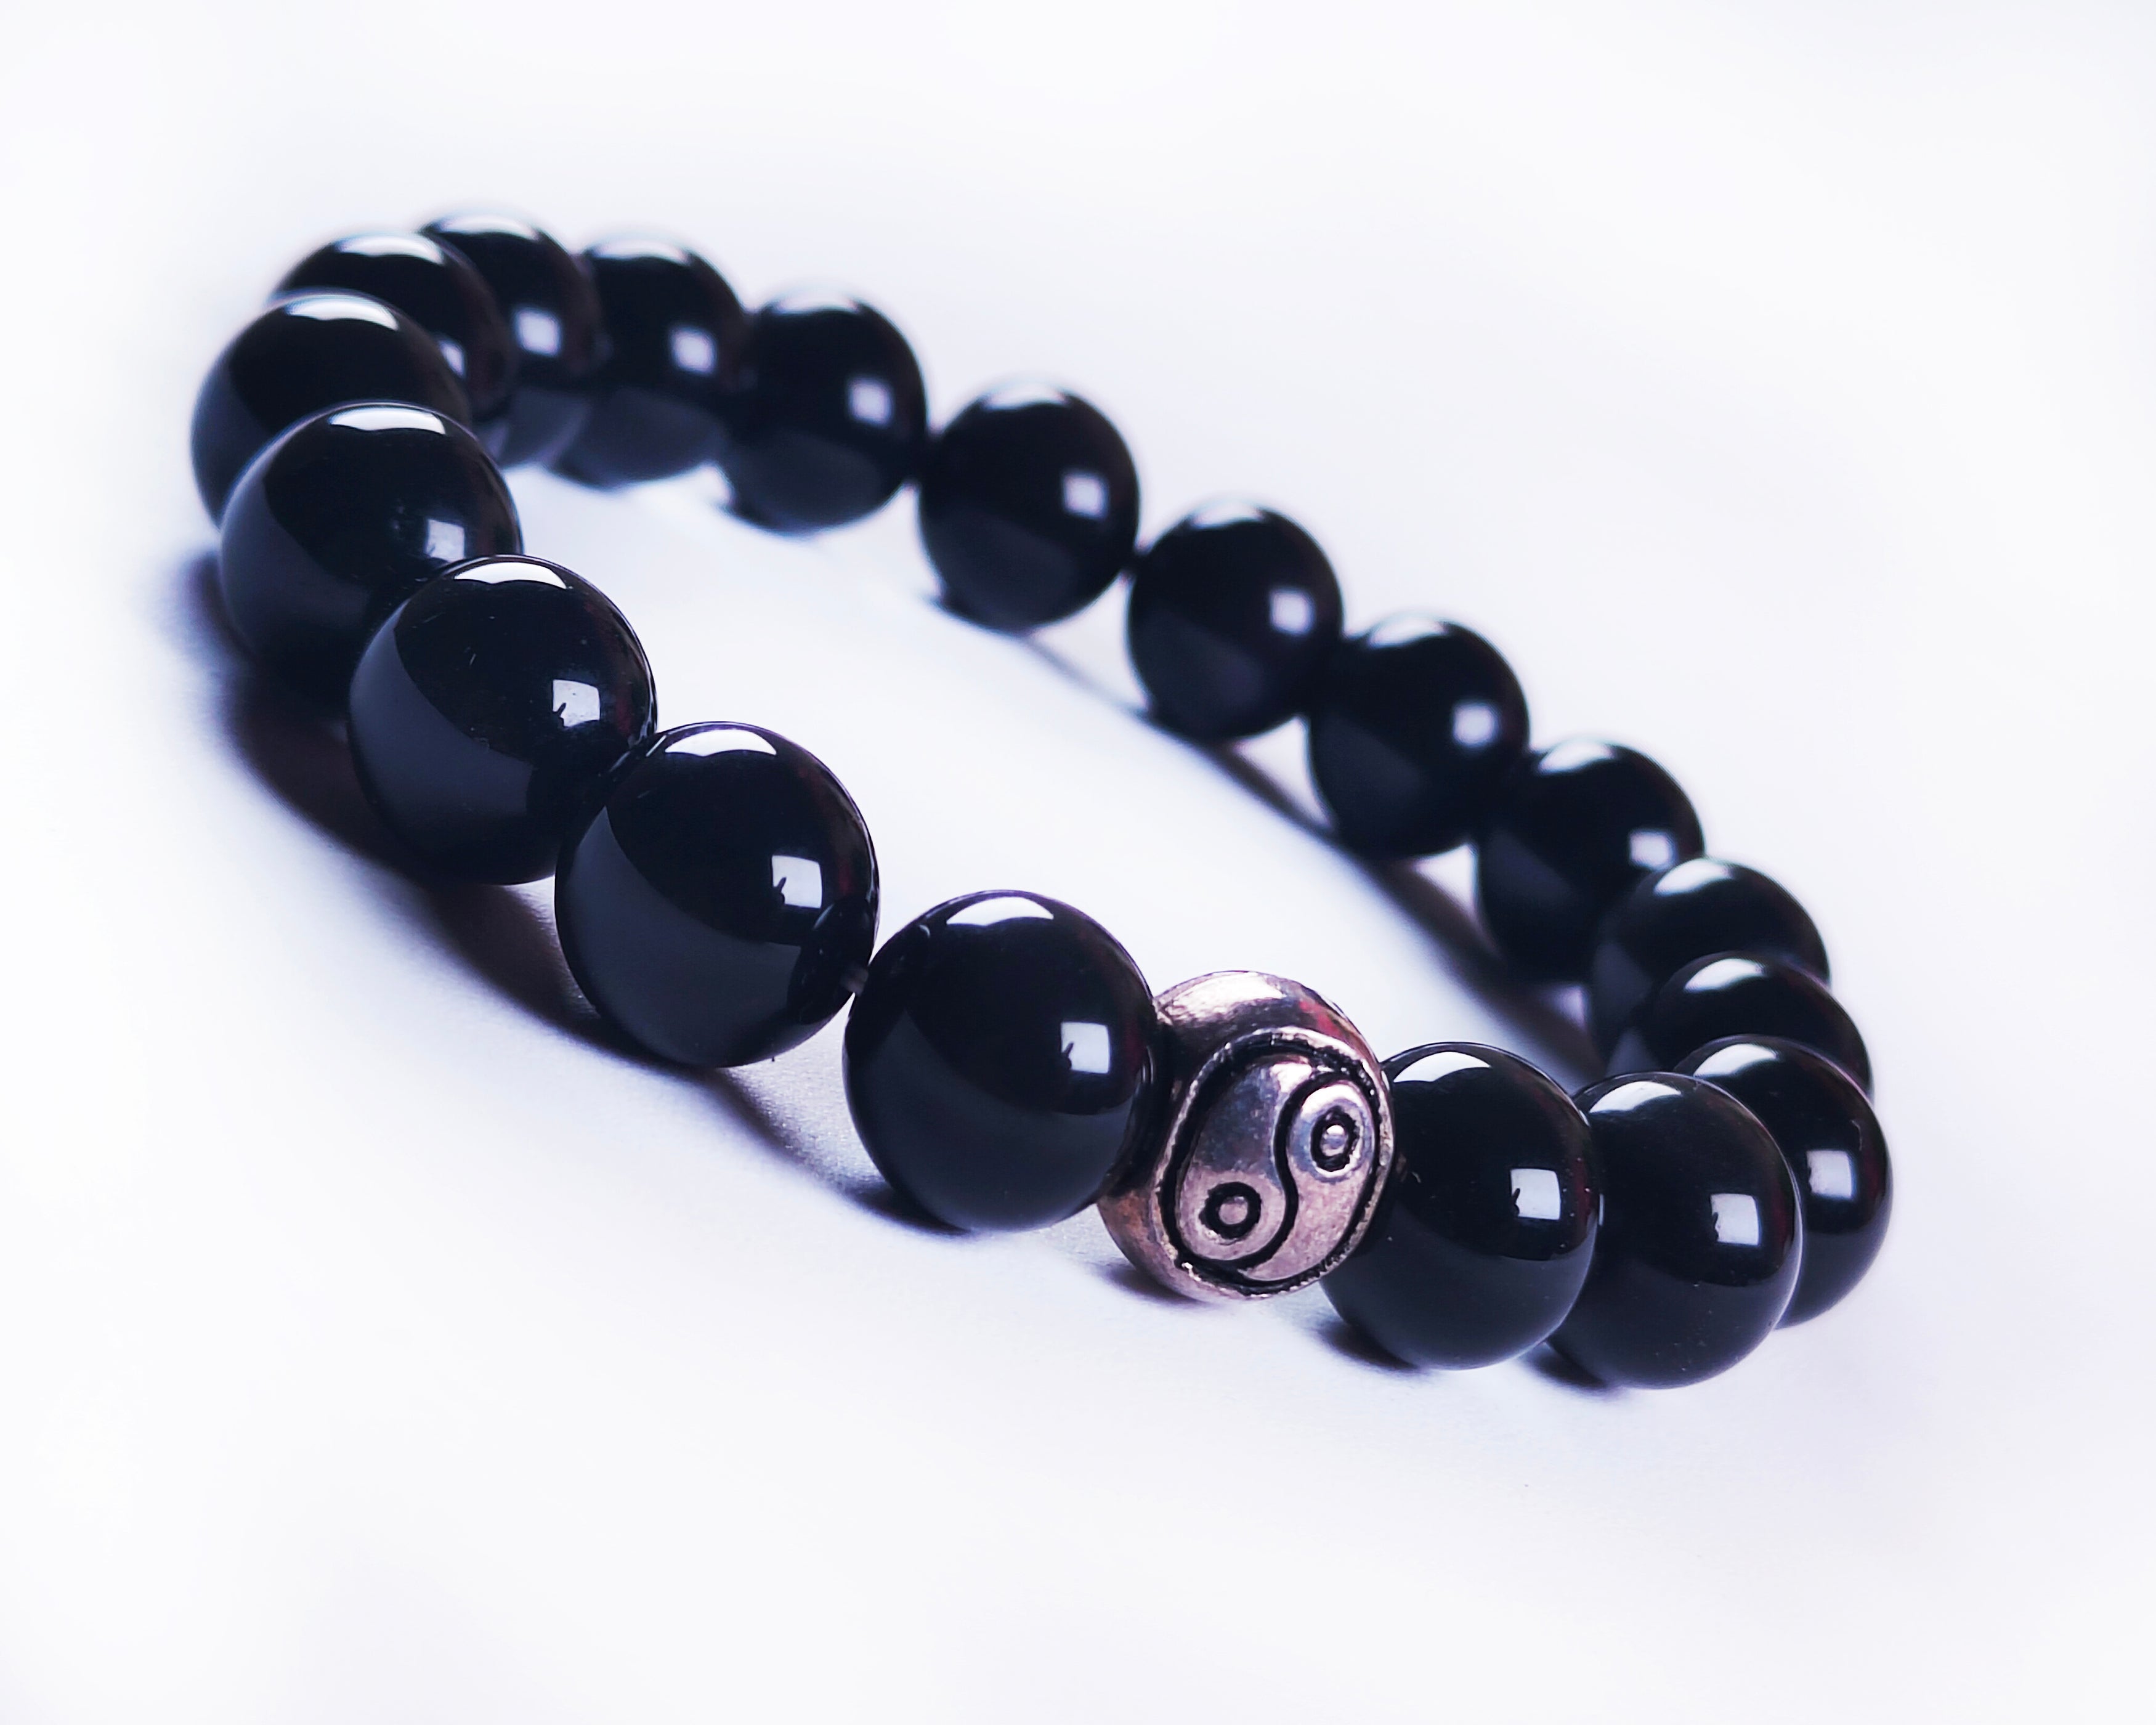 Black Obsidian With Evil Eye Charms Double Layers Bracelet Or Choker by  Farra